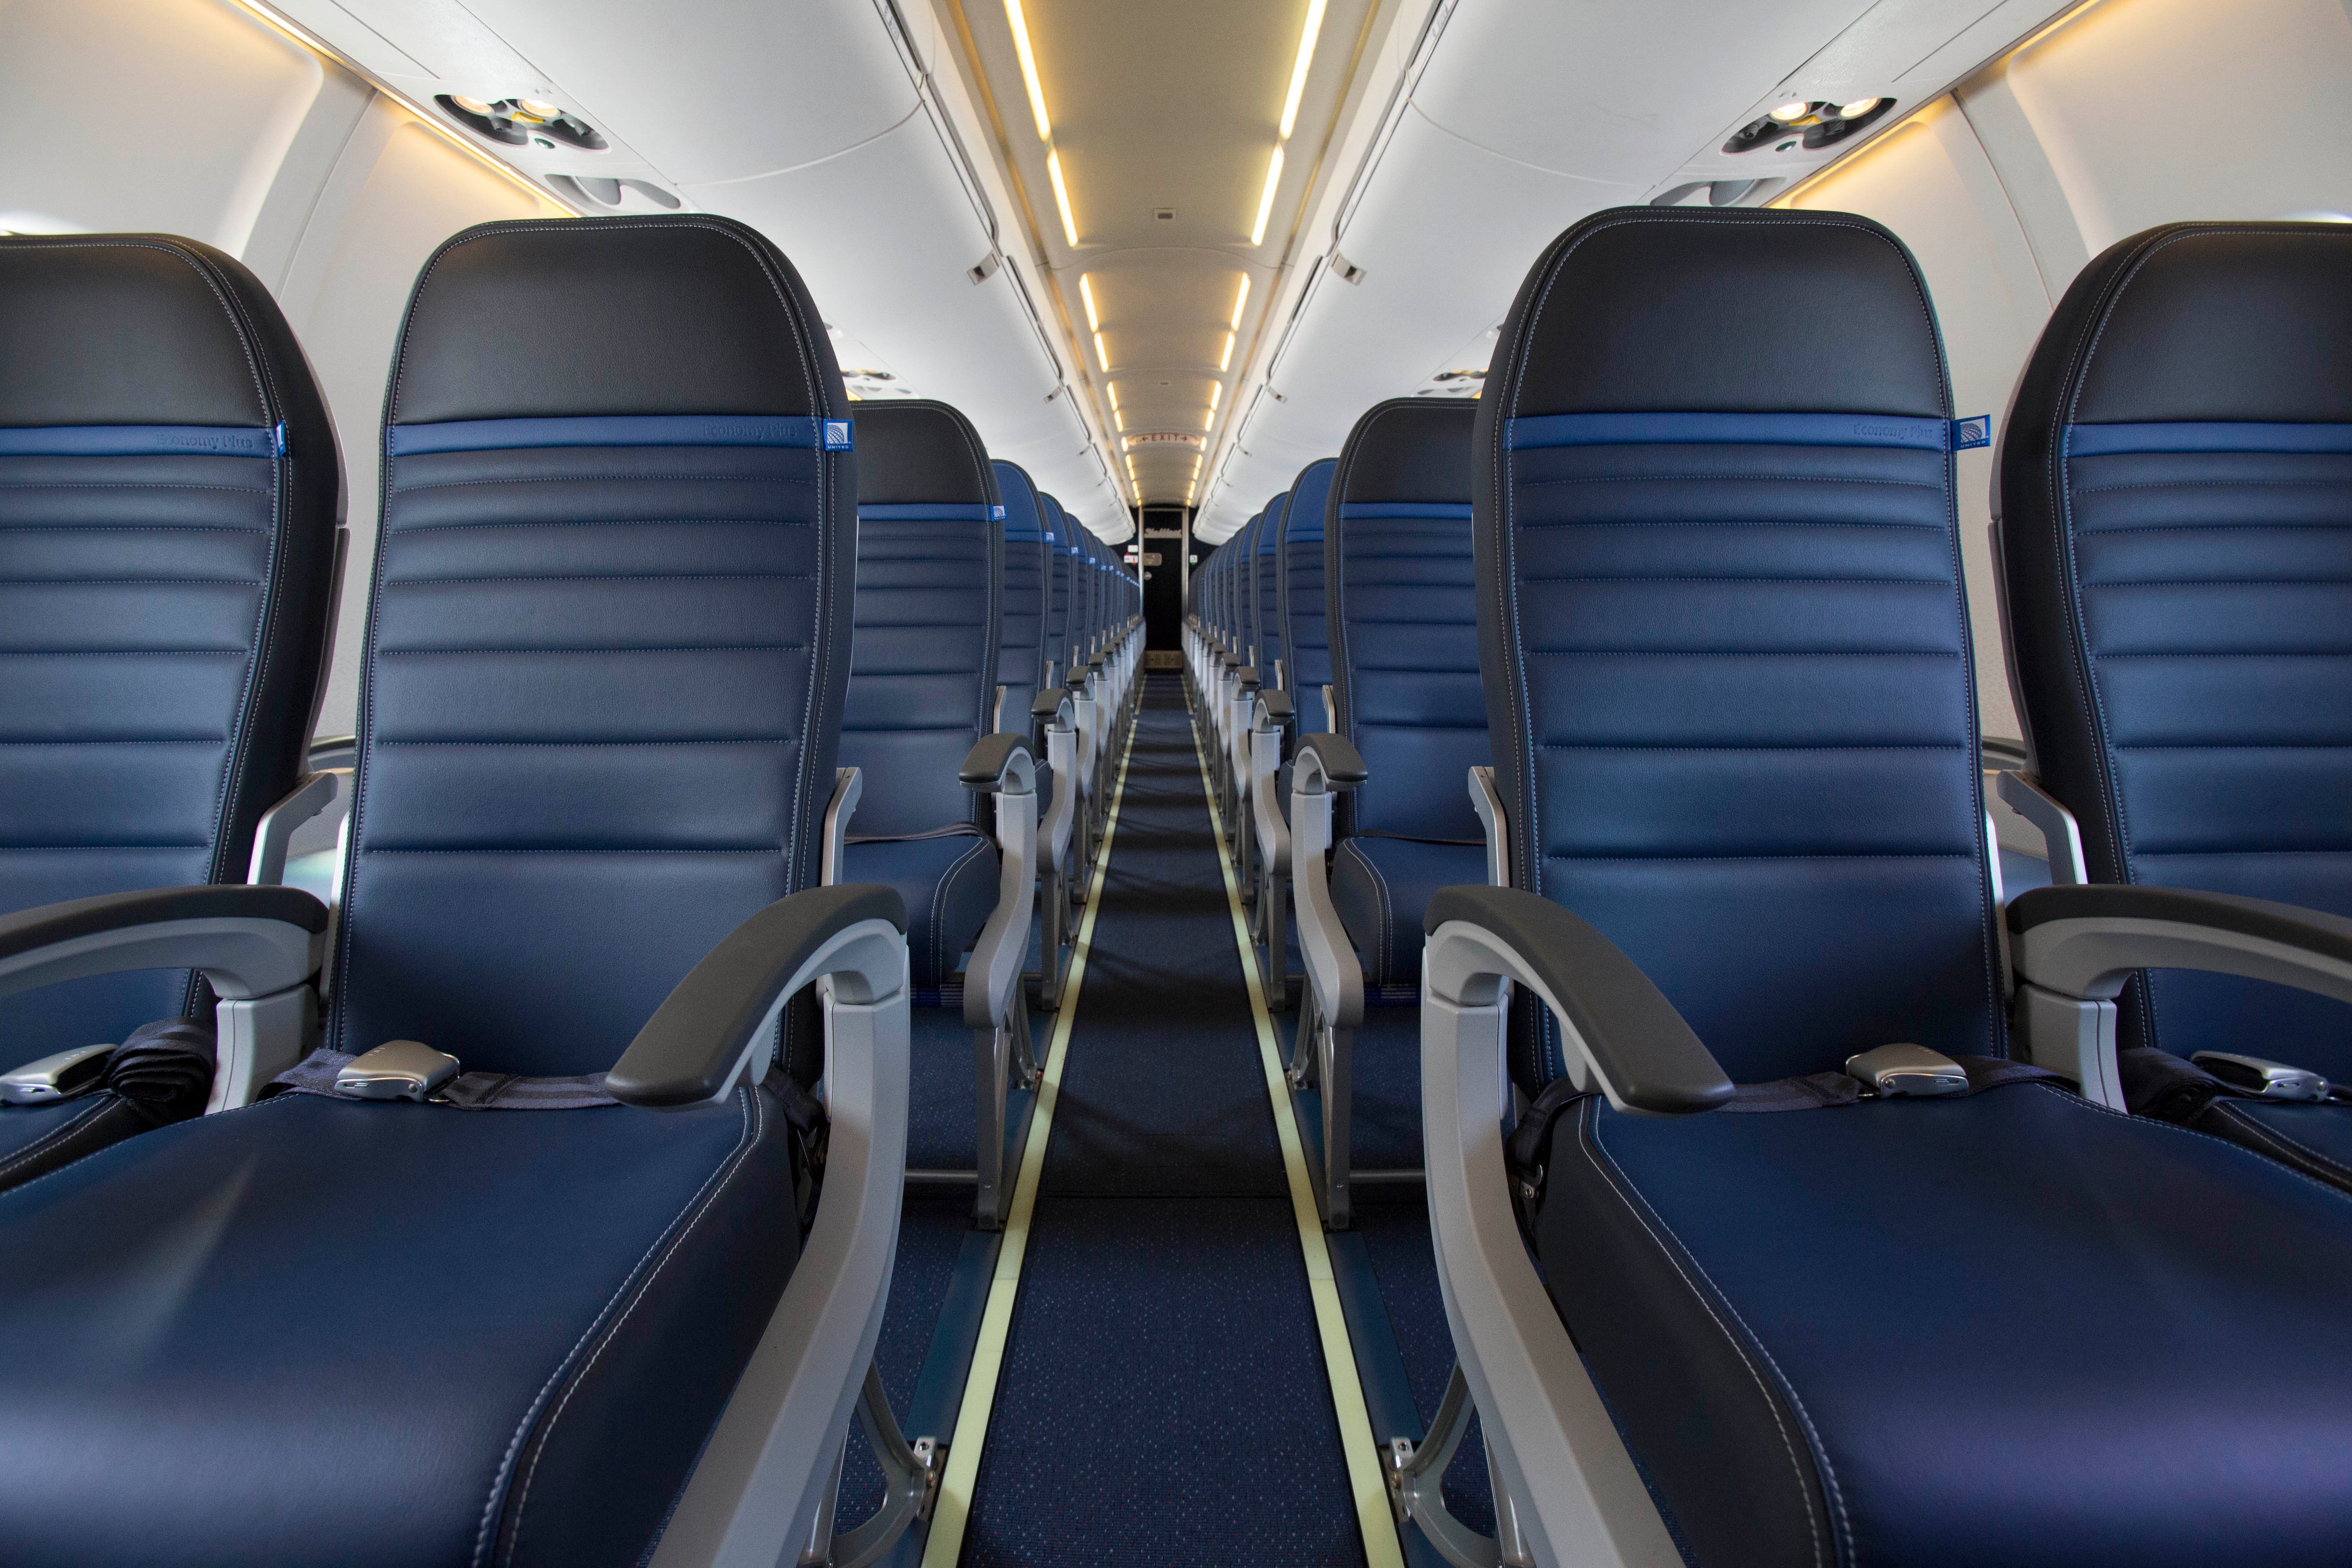 What to Look for in Airline Seat Reviews - NerdWallet